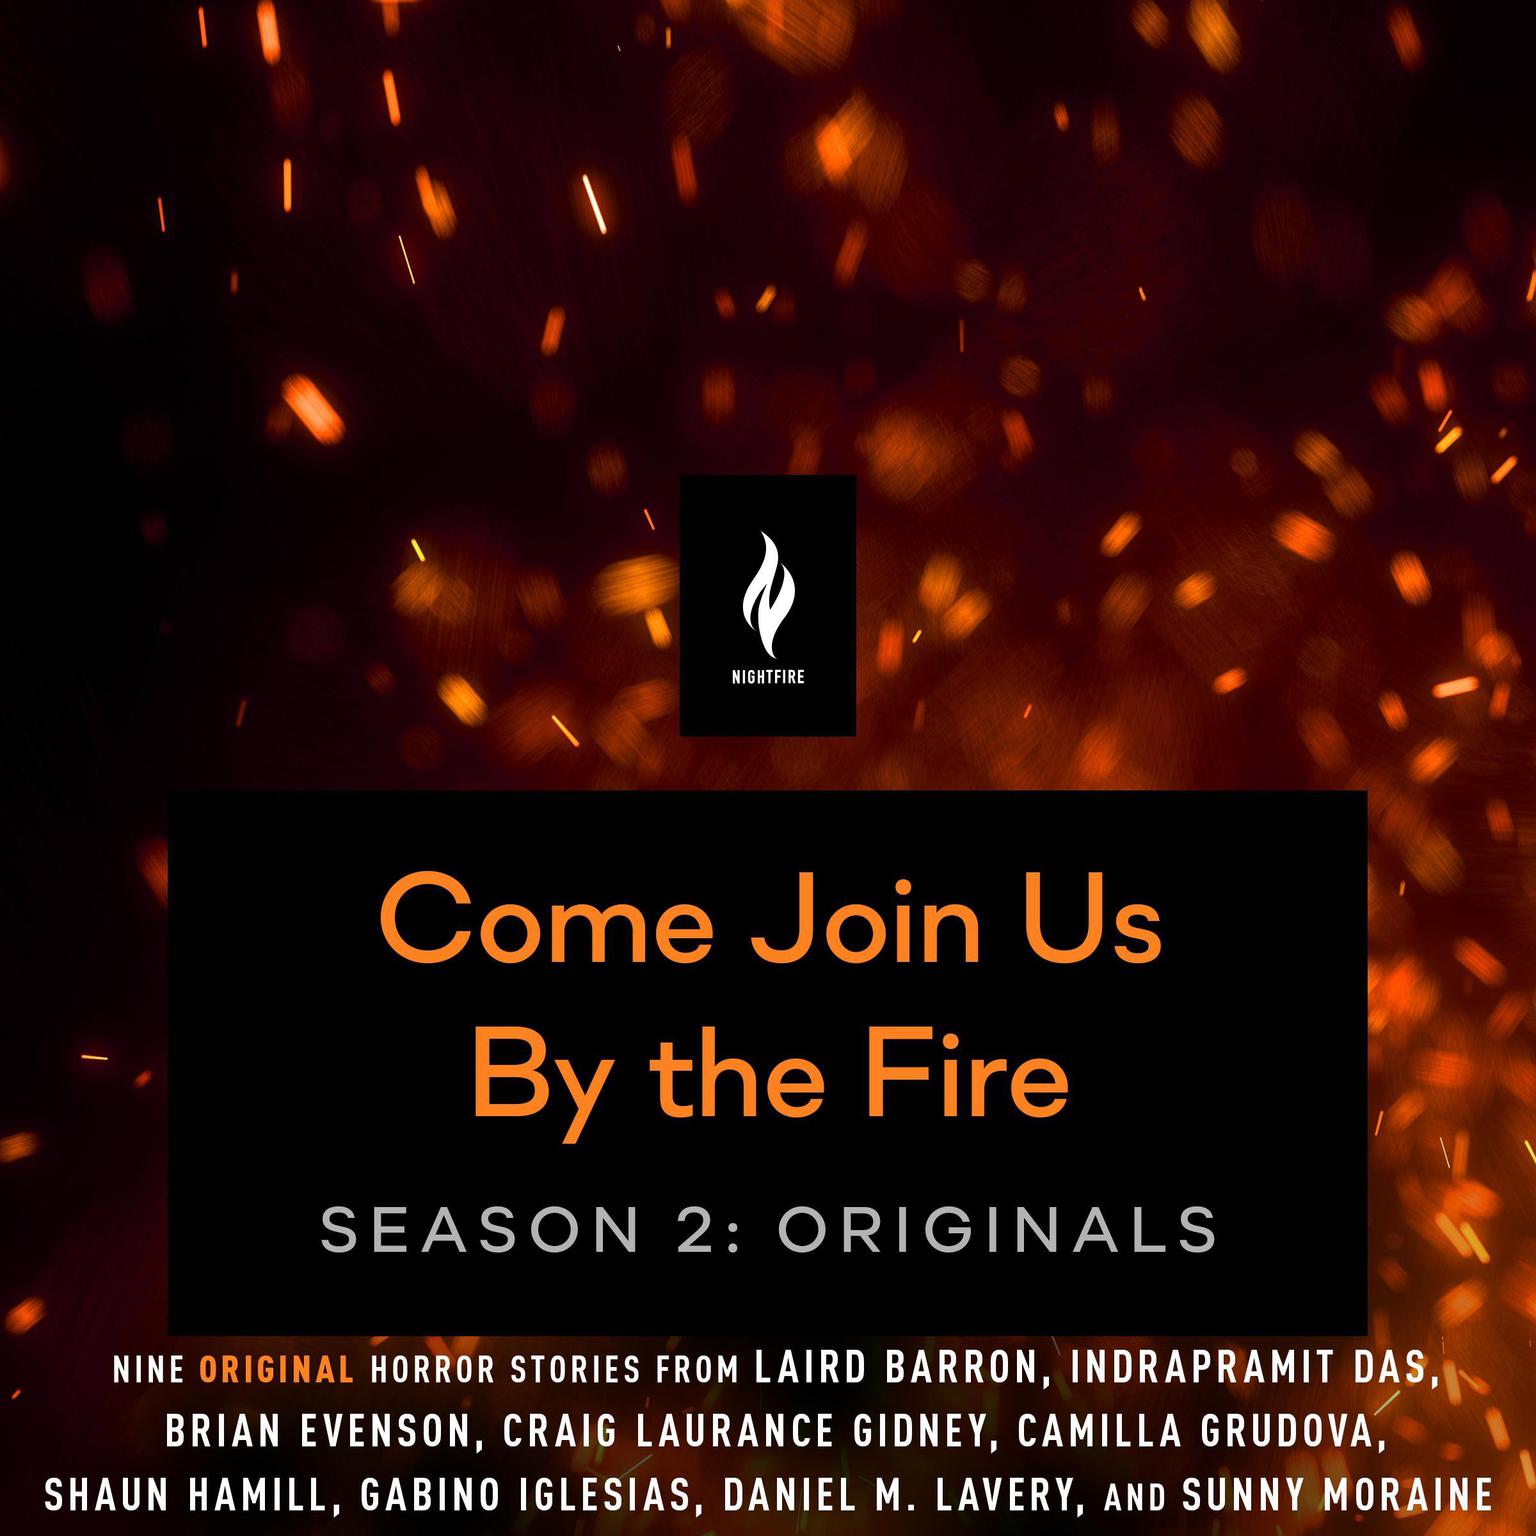 Come Join Us By The Fire Season 2, Originals: 9 Short Horror Tales from Nightfire Audiobook, by various authors